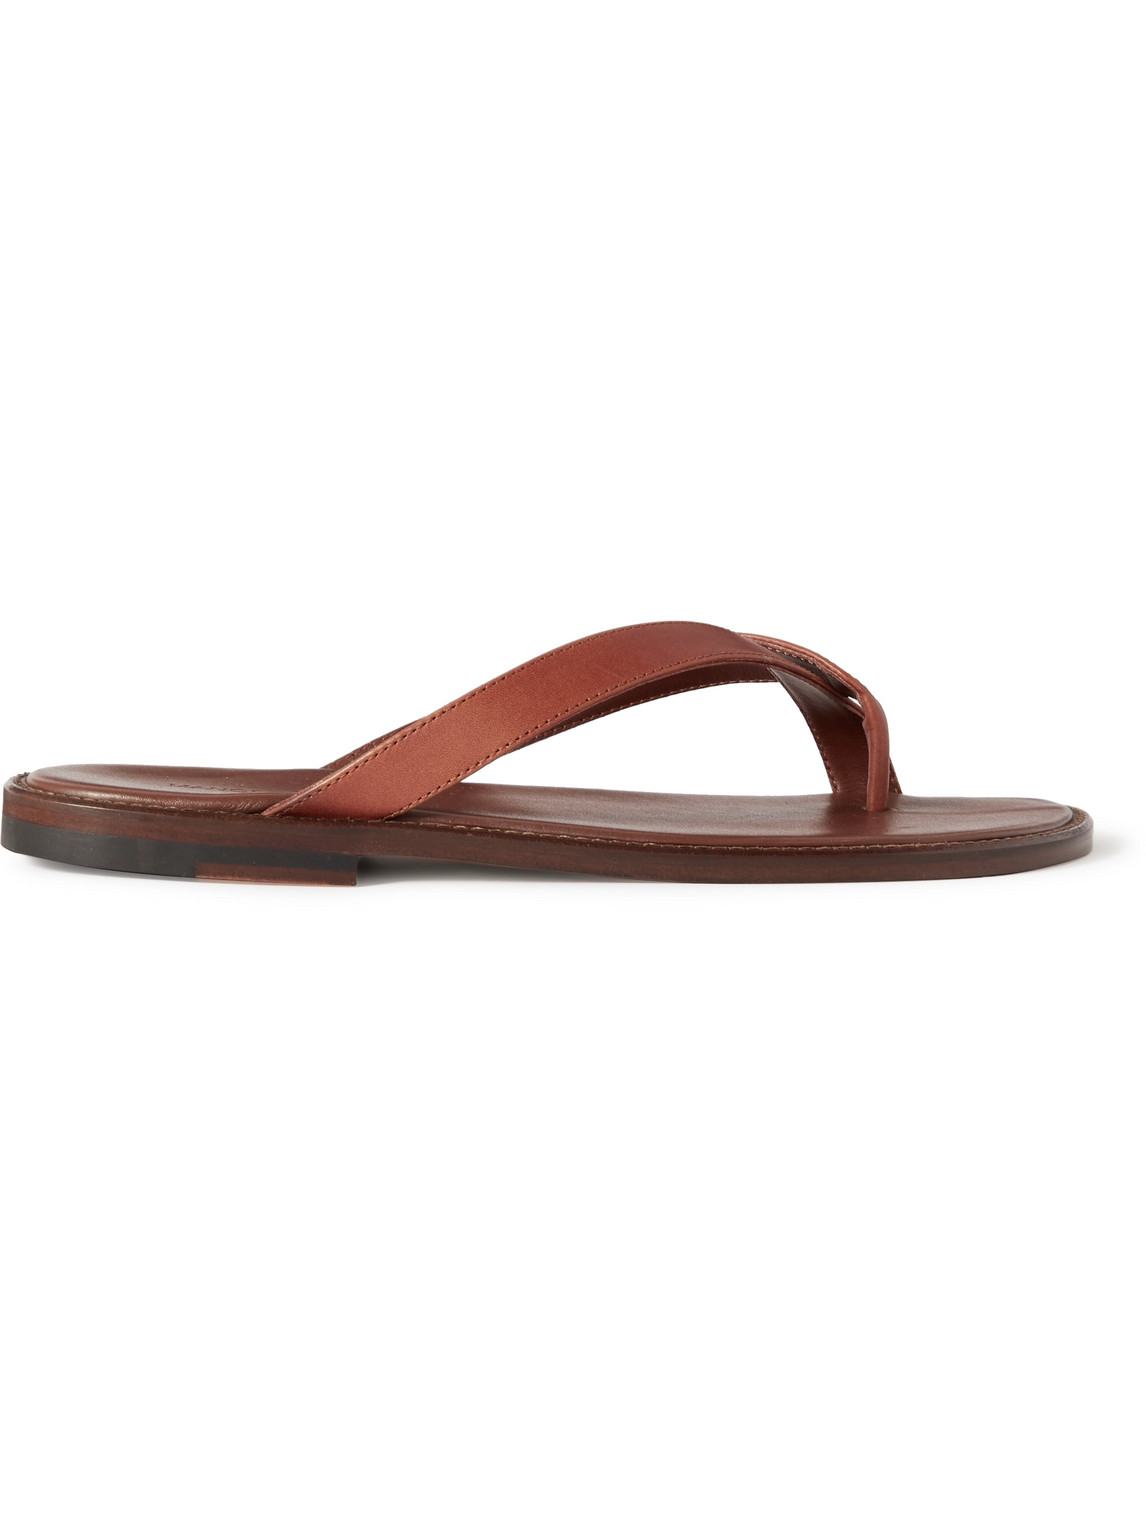 Siracusa Leather Flip Flops